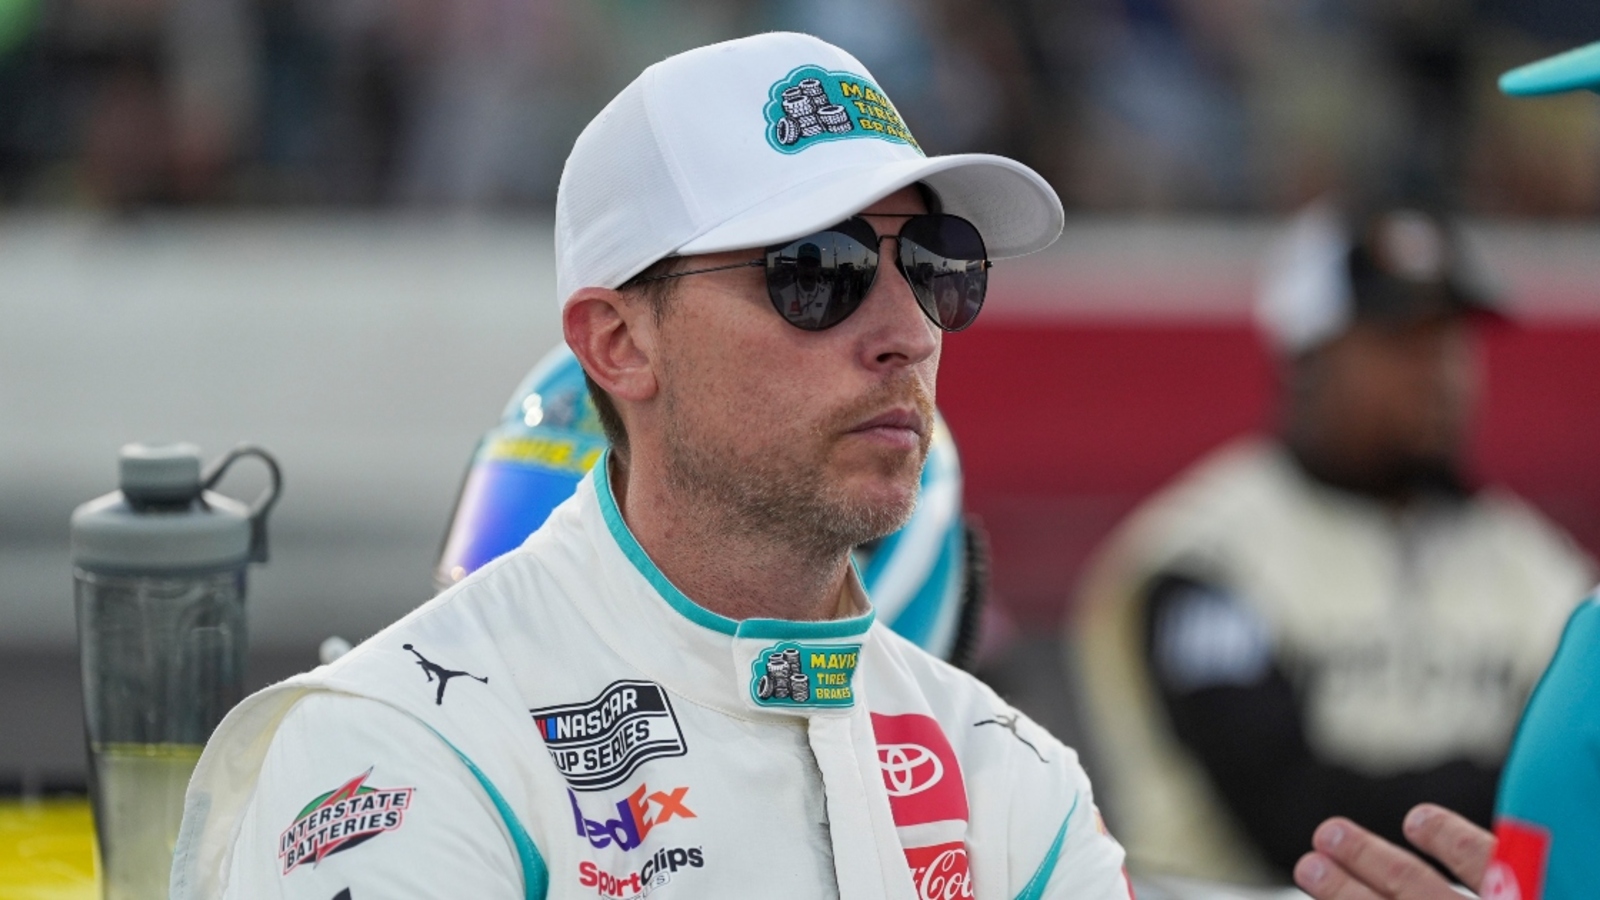 Denny Hamlin claims he couldn’t get within two car lengths of Joey Logano due to aero at North Wilkesboro